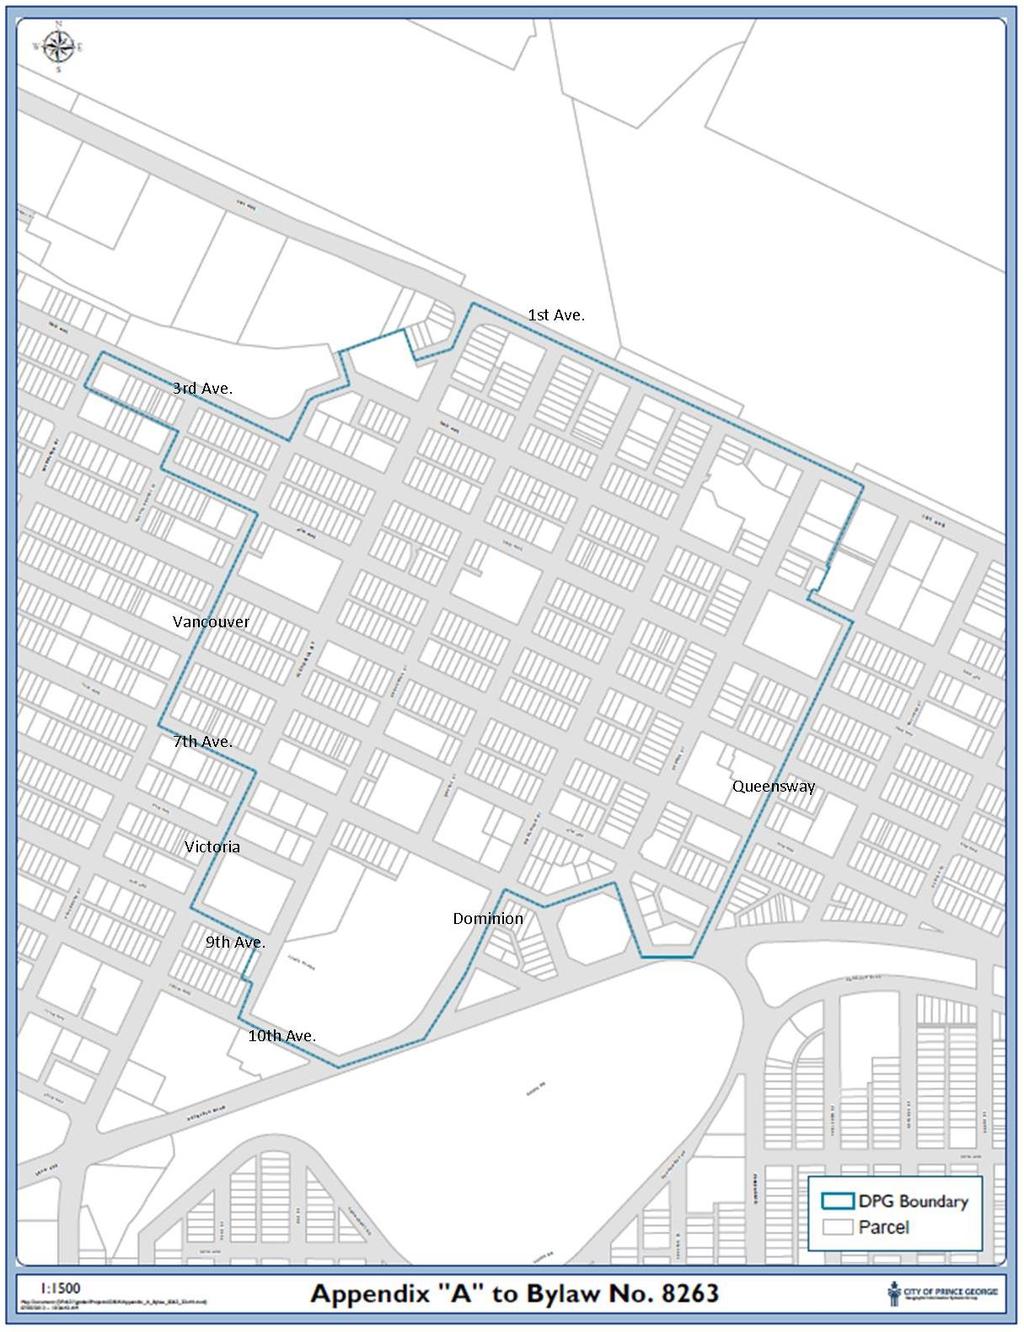 APPENDIX I: Map of Downtown Prince George / C1 Zone Area